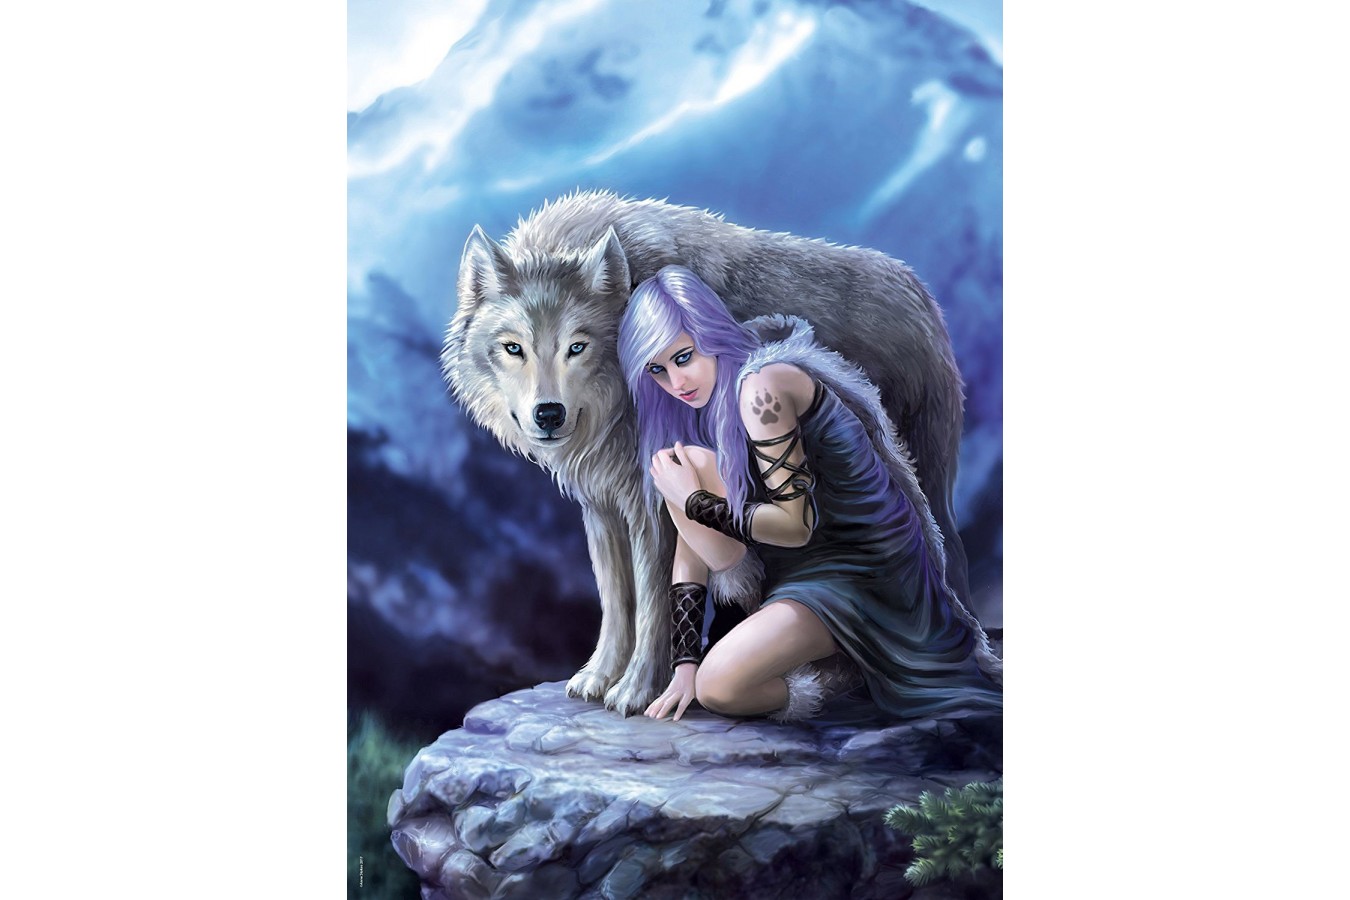 Puzzle Clementoni - Anne Stokes: Protector, 1000 piese (62433)